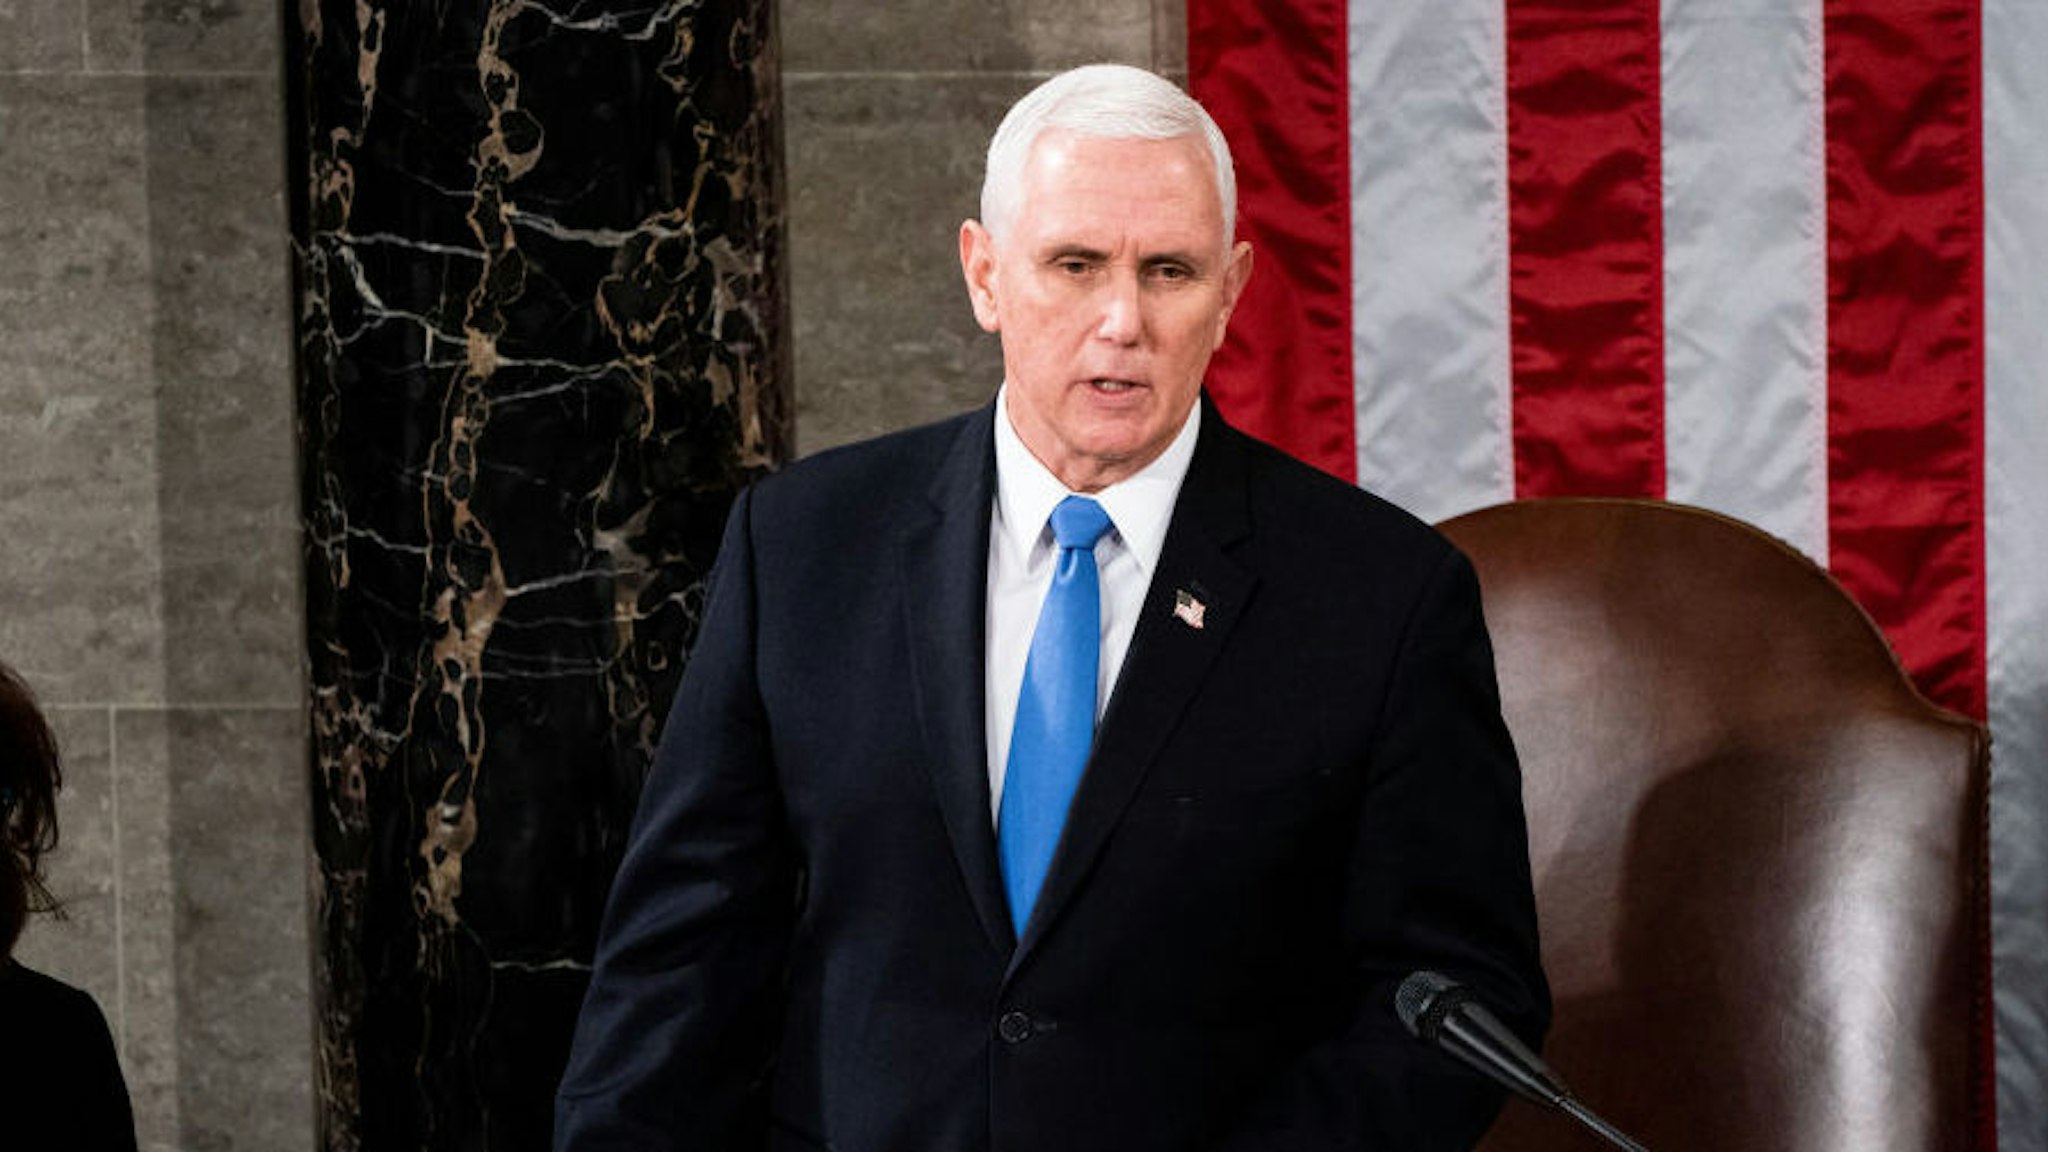 House Speaker Nancy Pelosi and Vice President Mike Pence preside over a Joint session of Congress to certify the 2020 Electoral College results on Capitol Hill in Washington, DC on January 6, 2020.